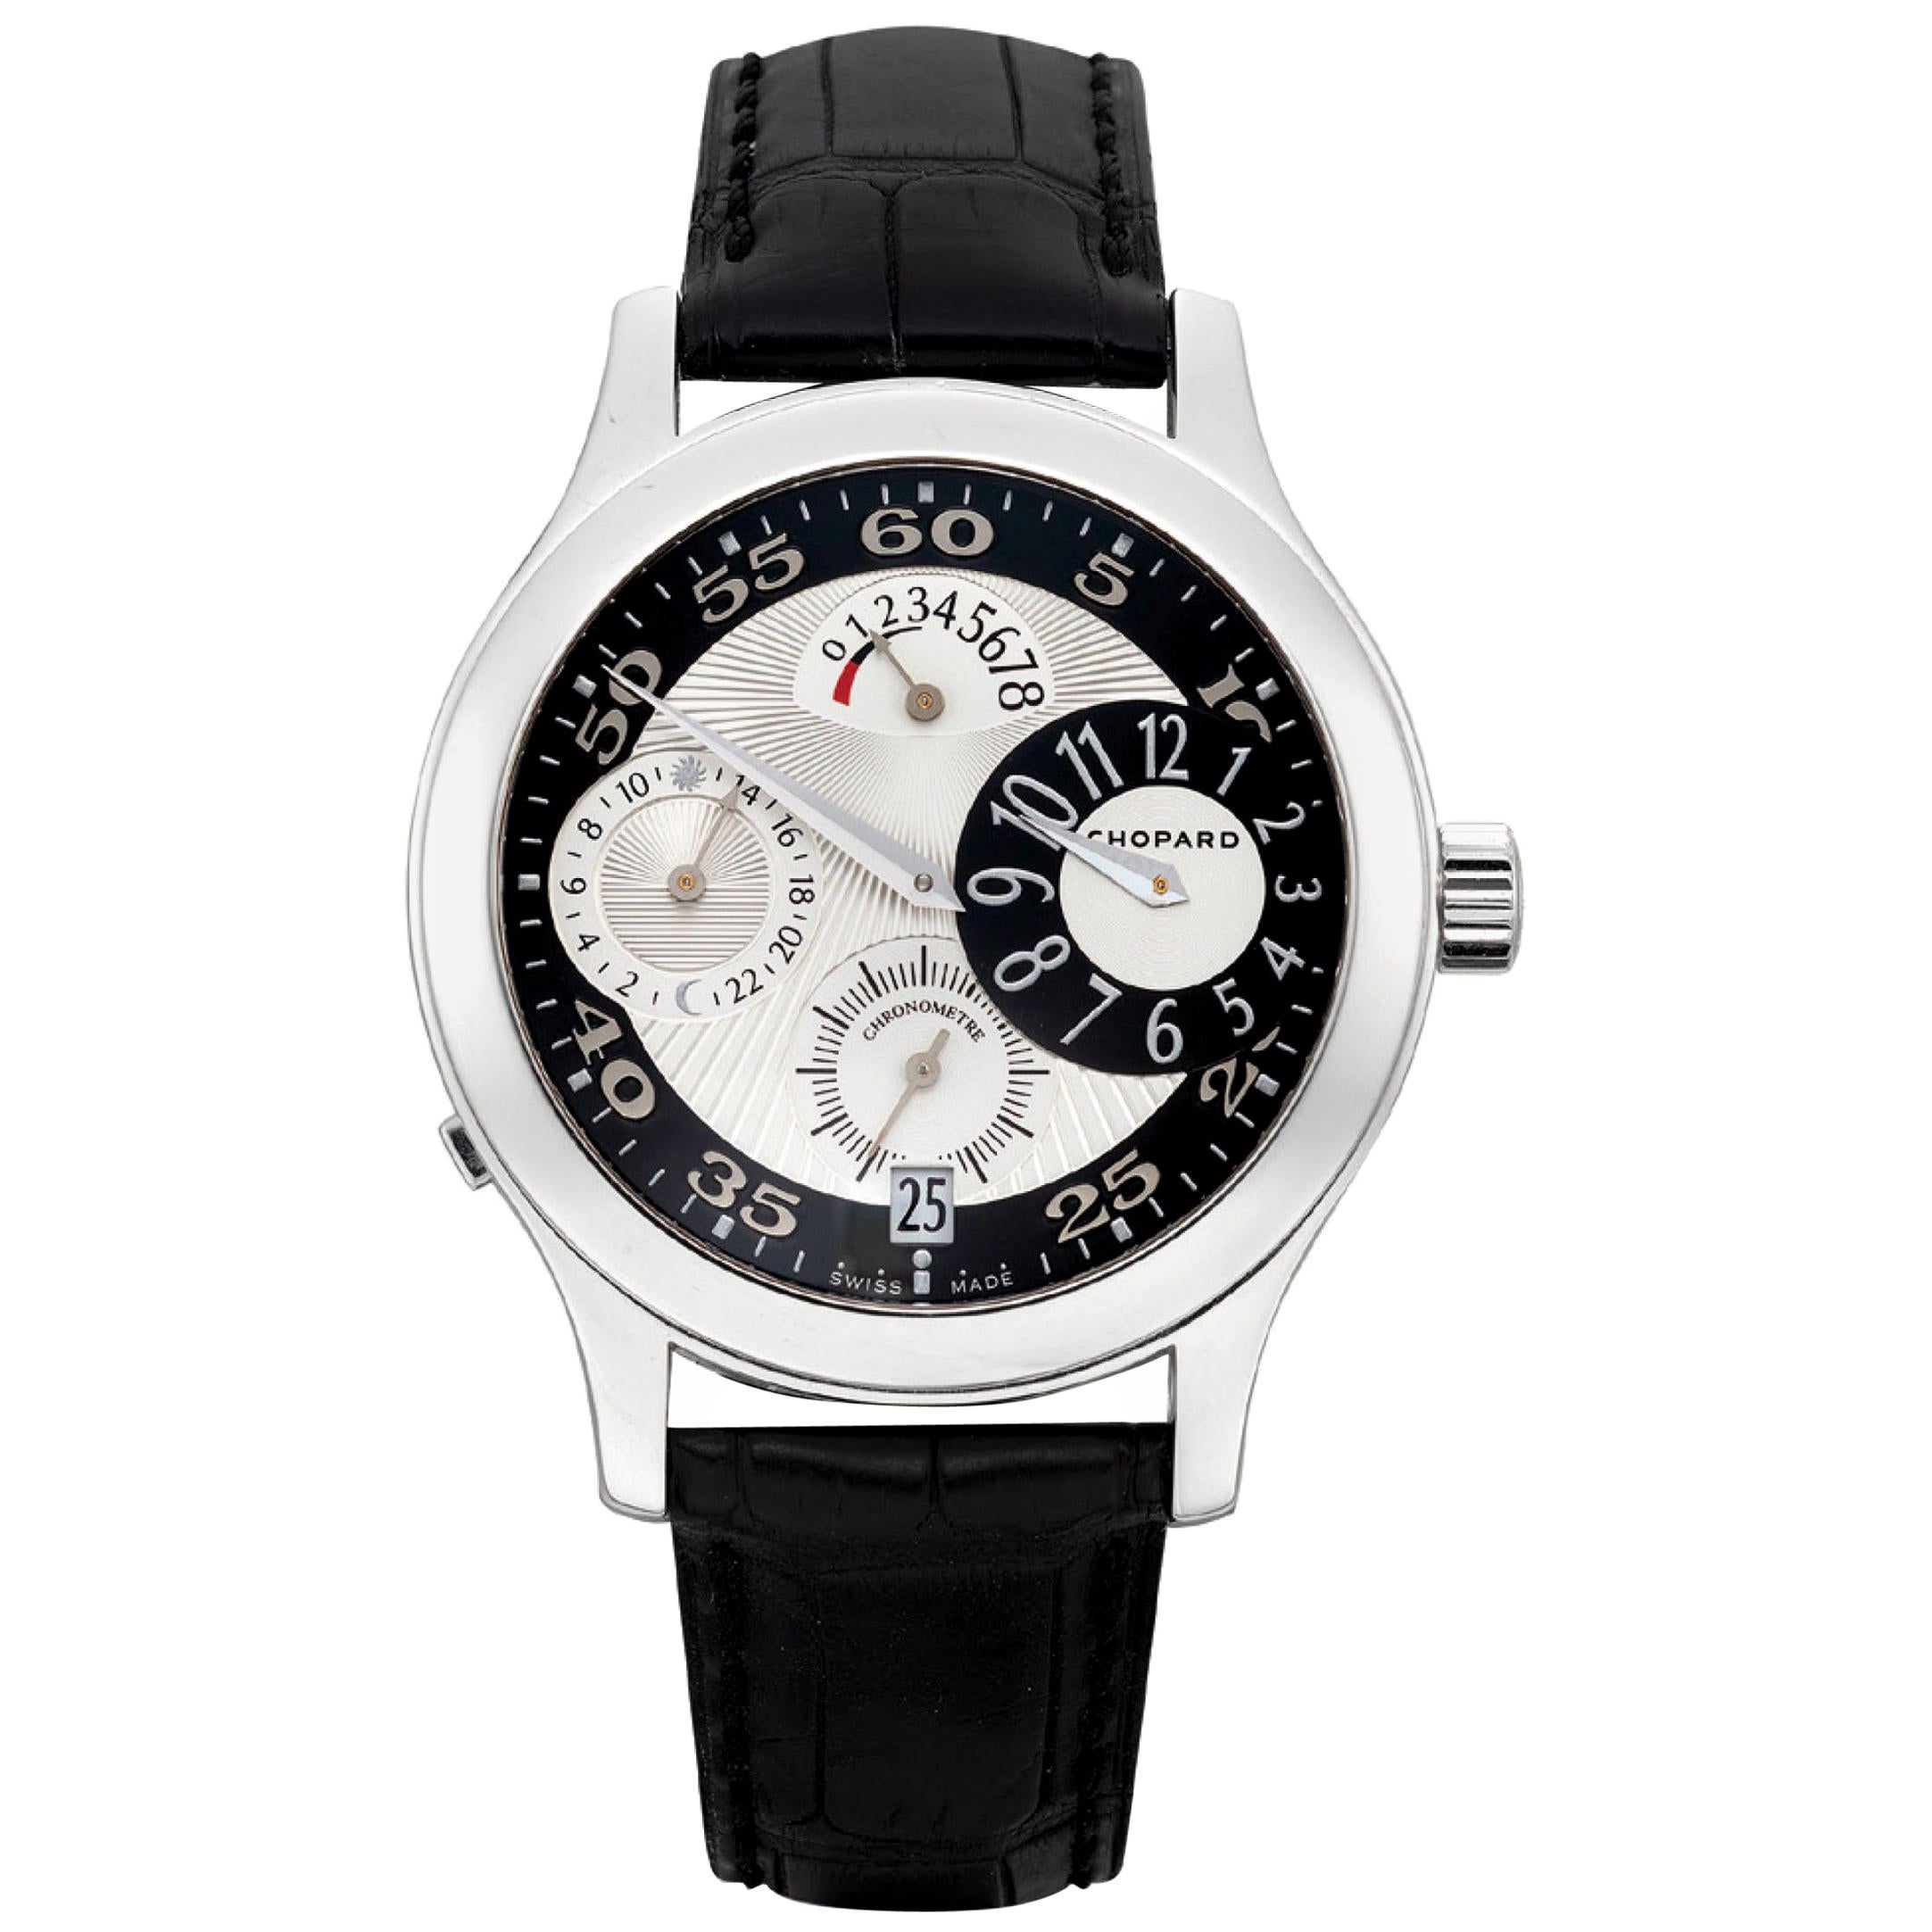 Chopard L.U.C 8 Day Power Reserve Limited Edition Men's Watch 16/1874